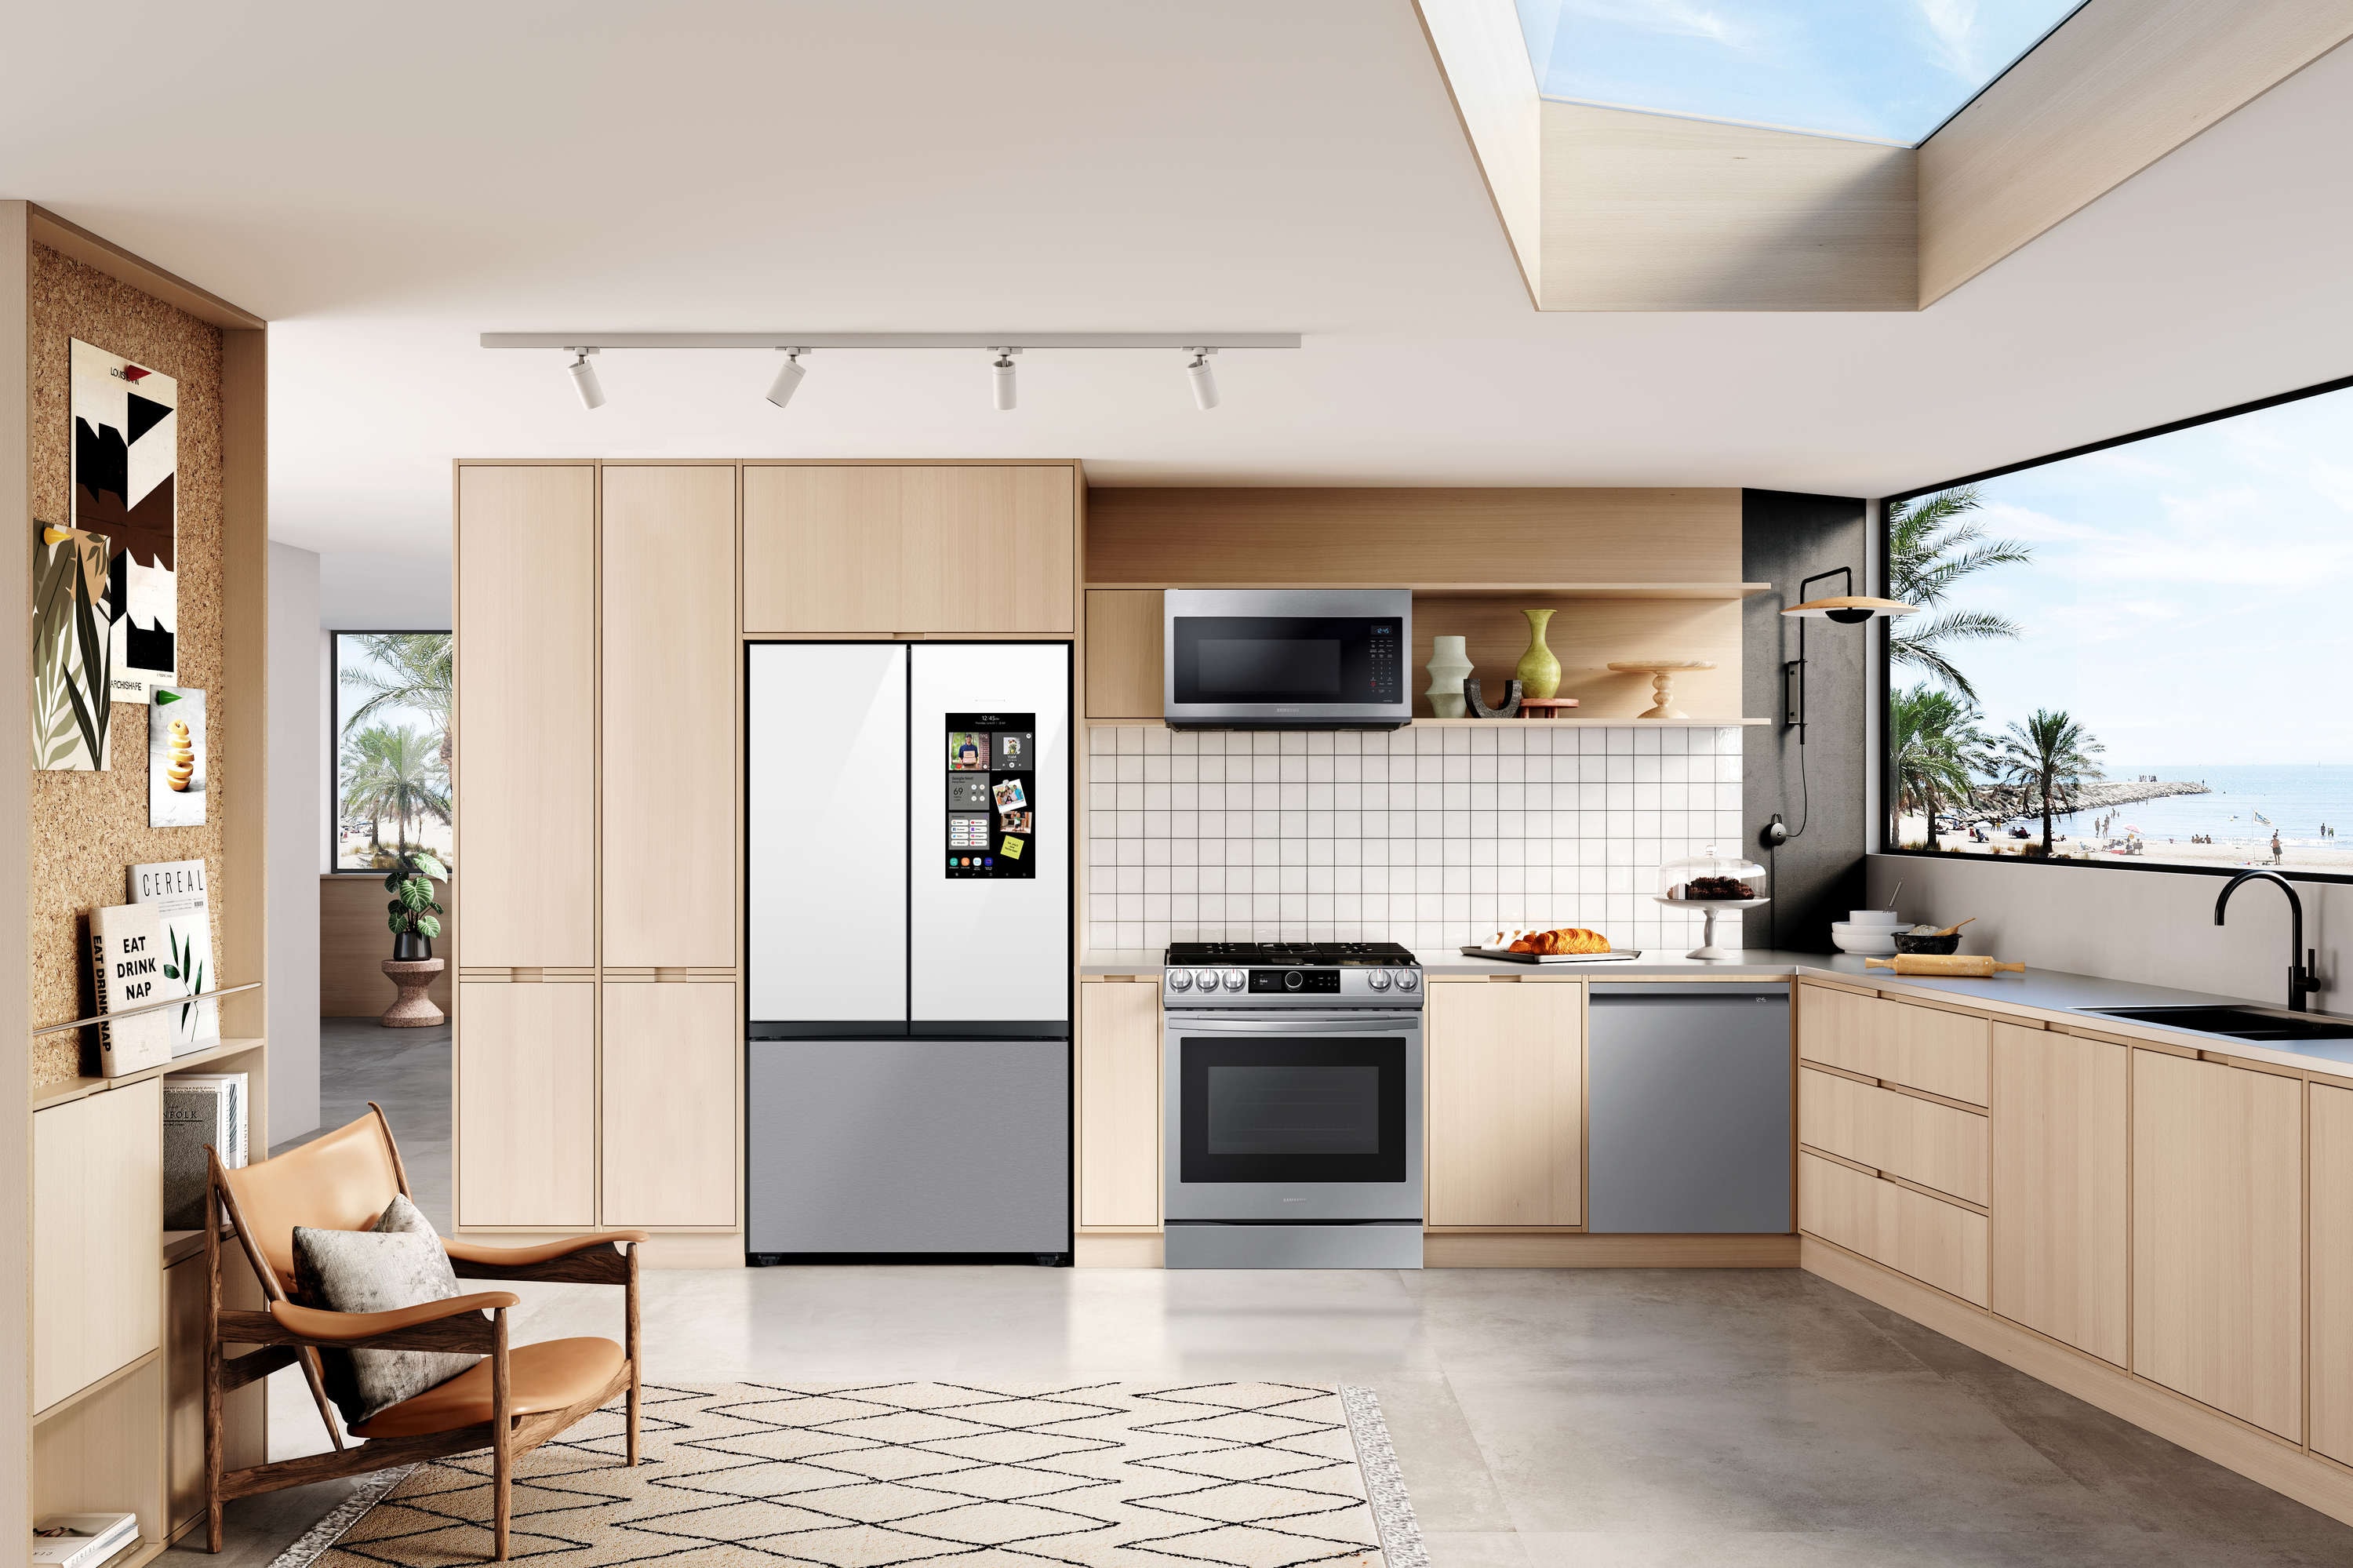 The Samsung Cube Refrigerator Series Stacks in Style